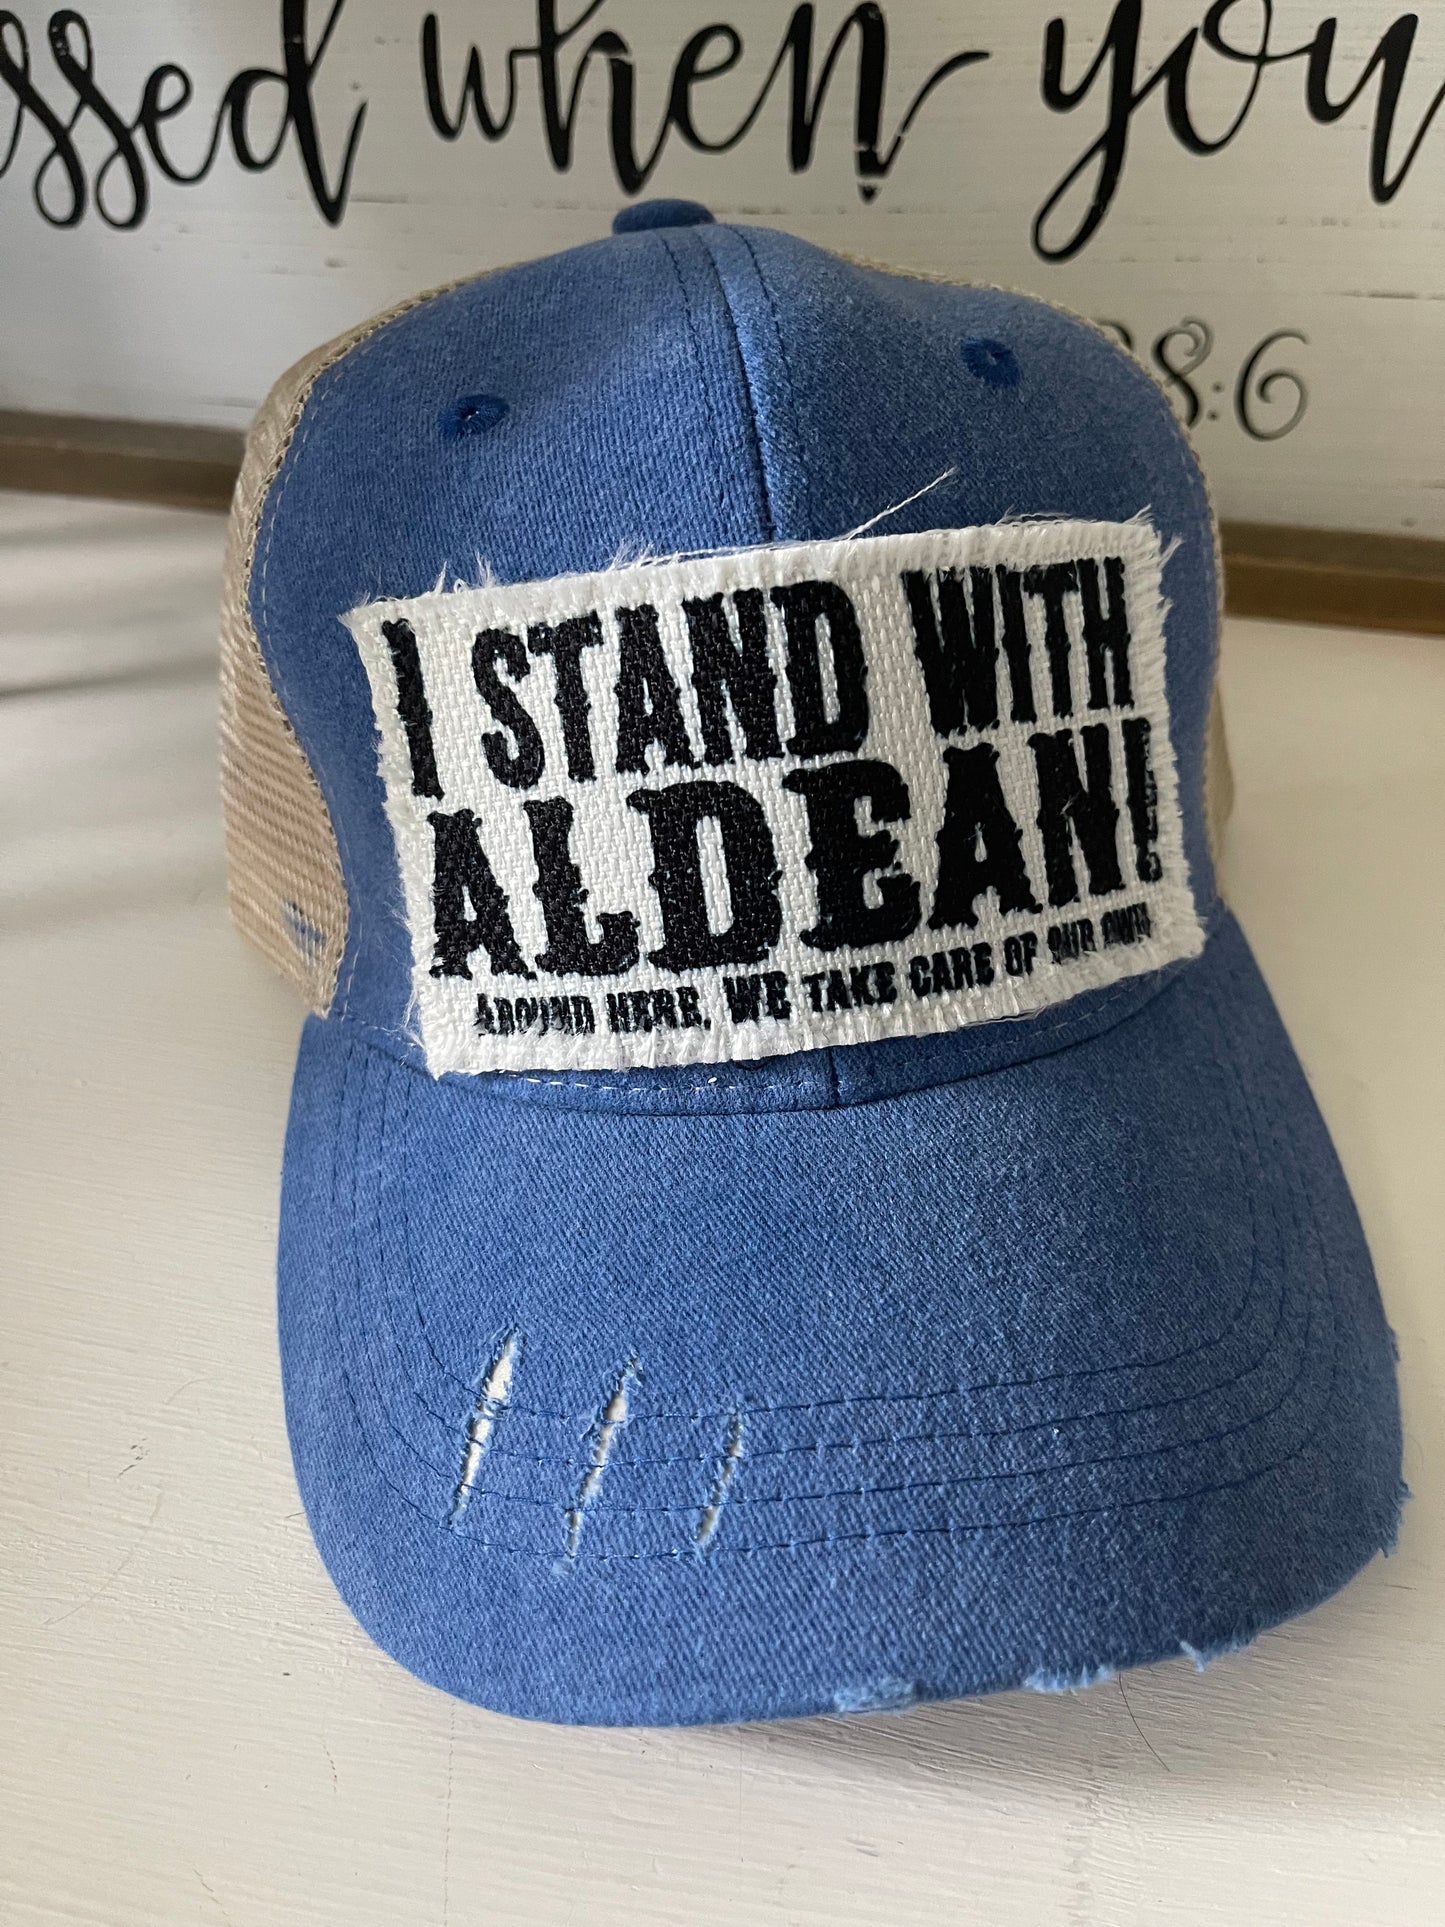 I STAND WITH ALDEAN HAT